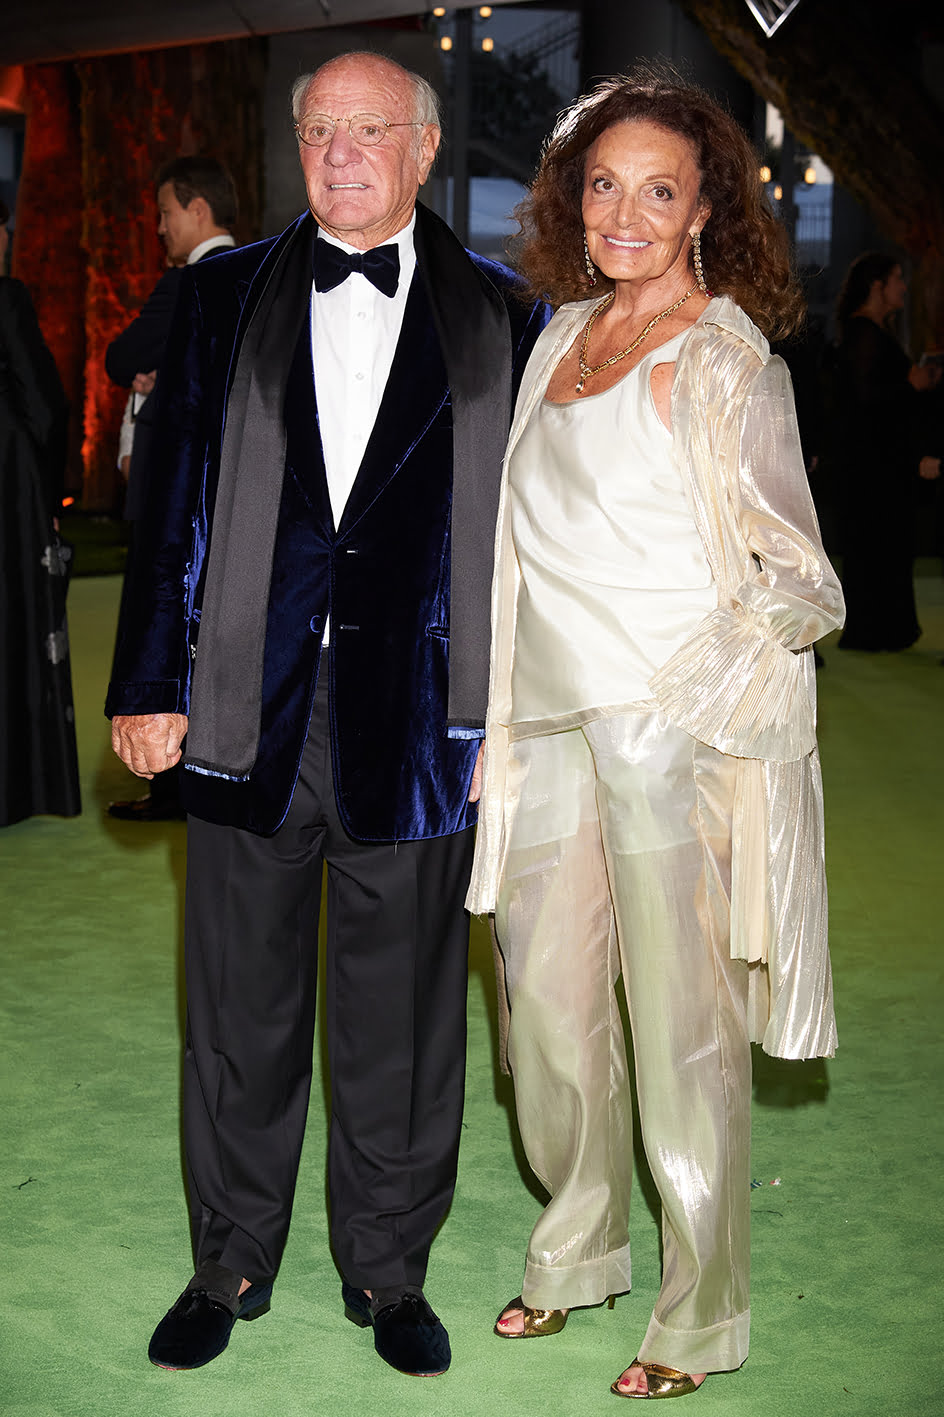 Barry Diller, Diane von Furstenberg attend the Academy Museum of Motion Pictures Opening Gala, September 25, 2021